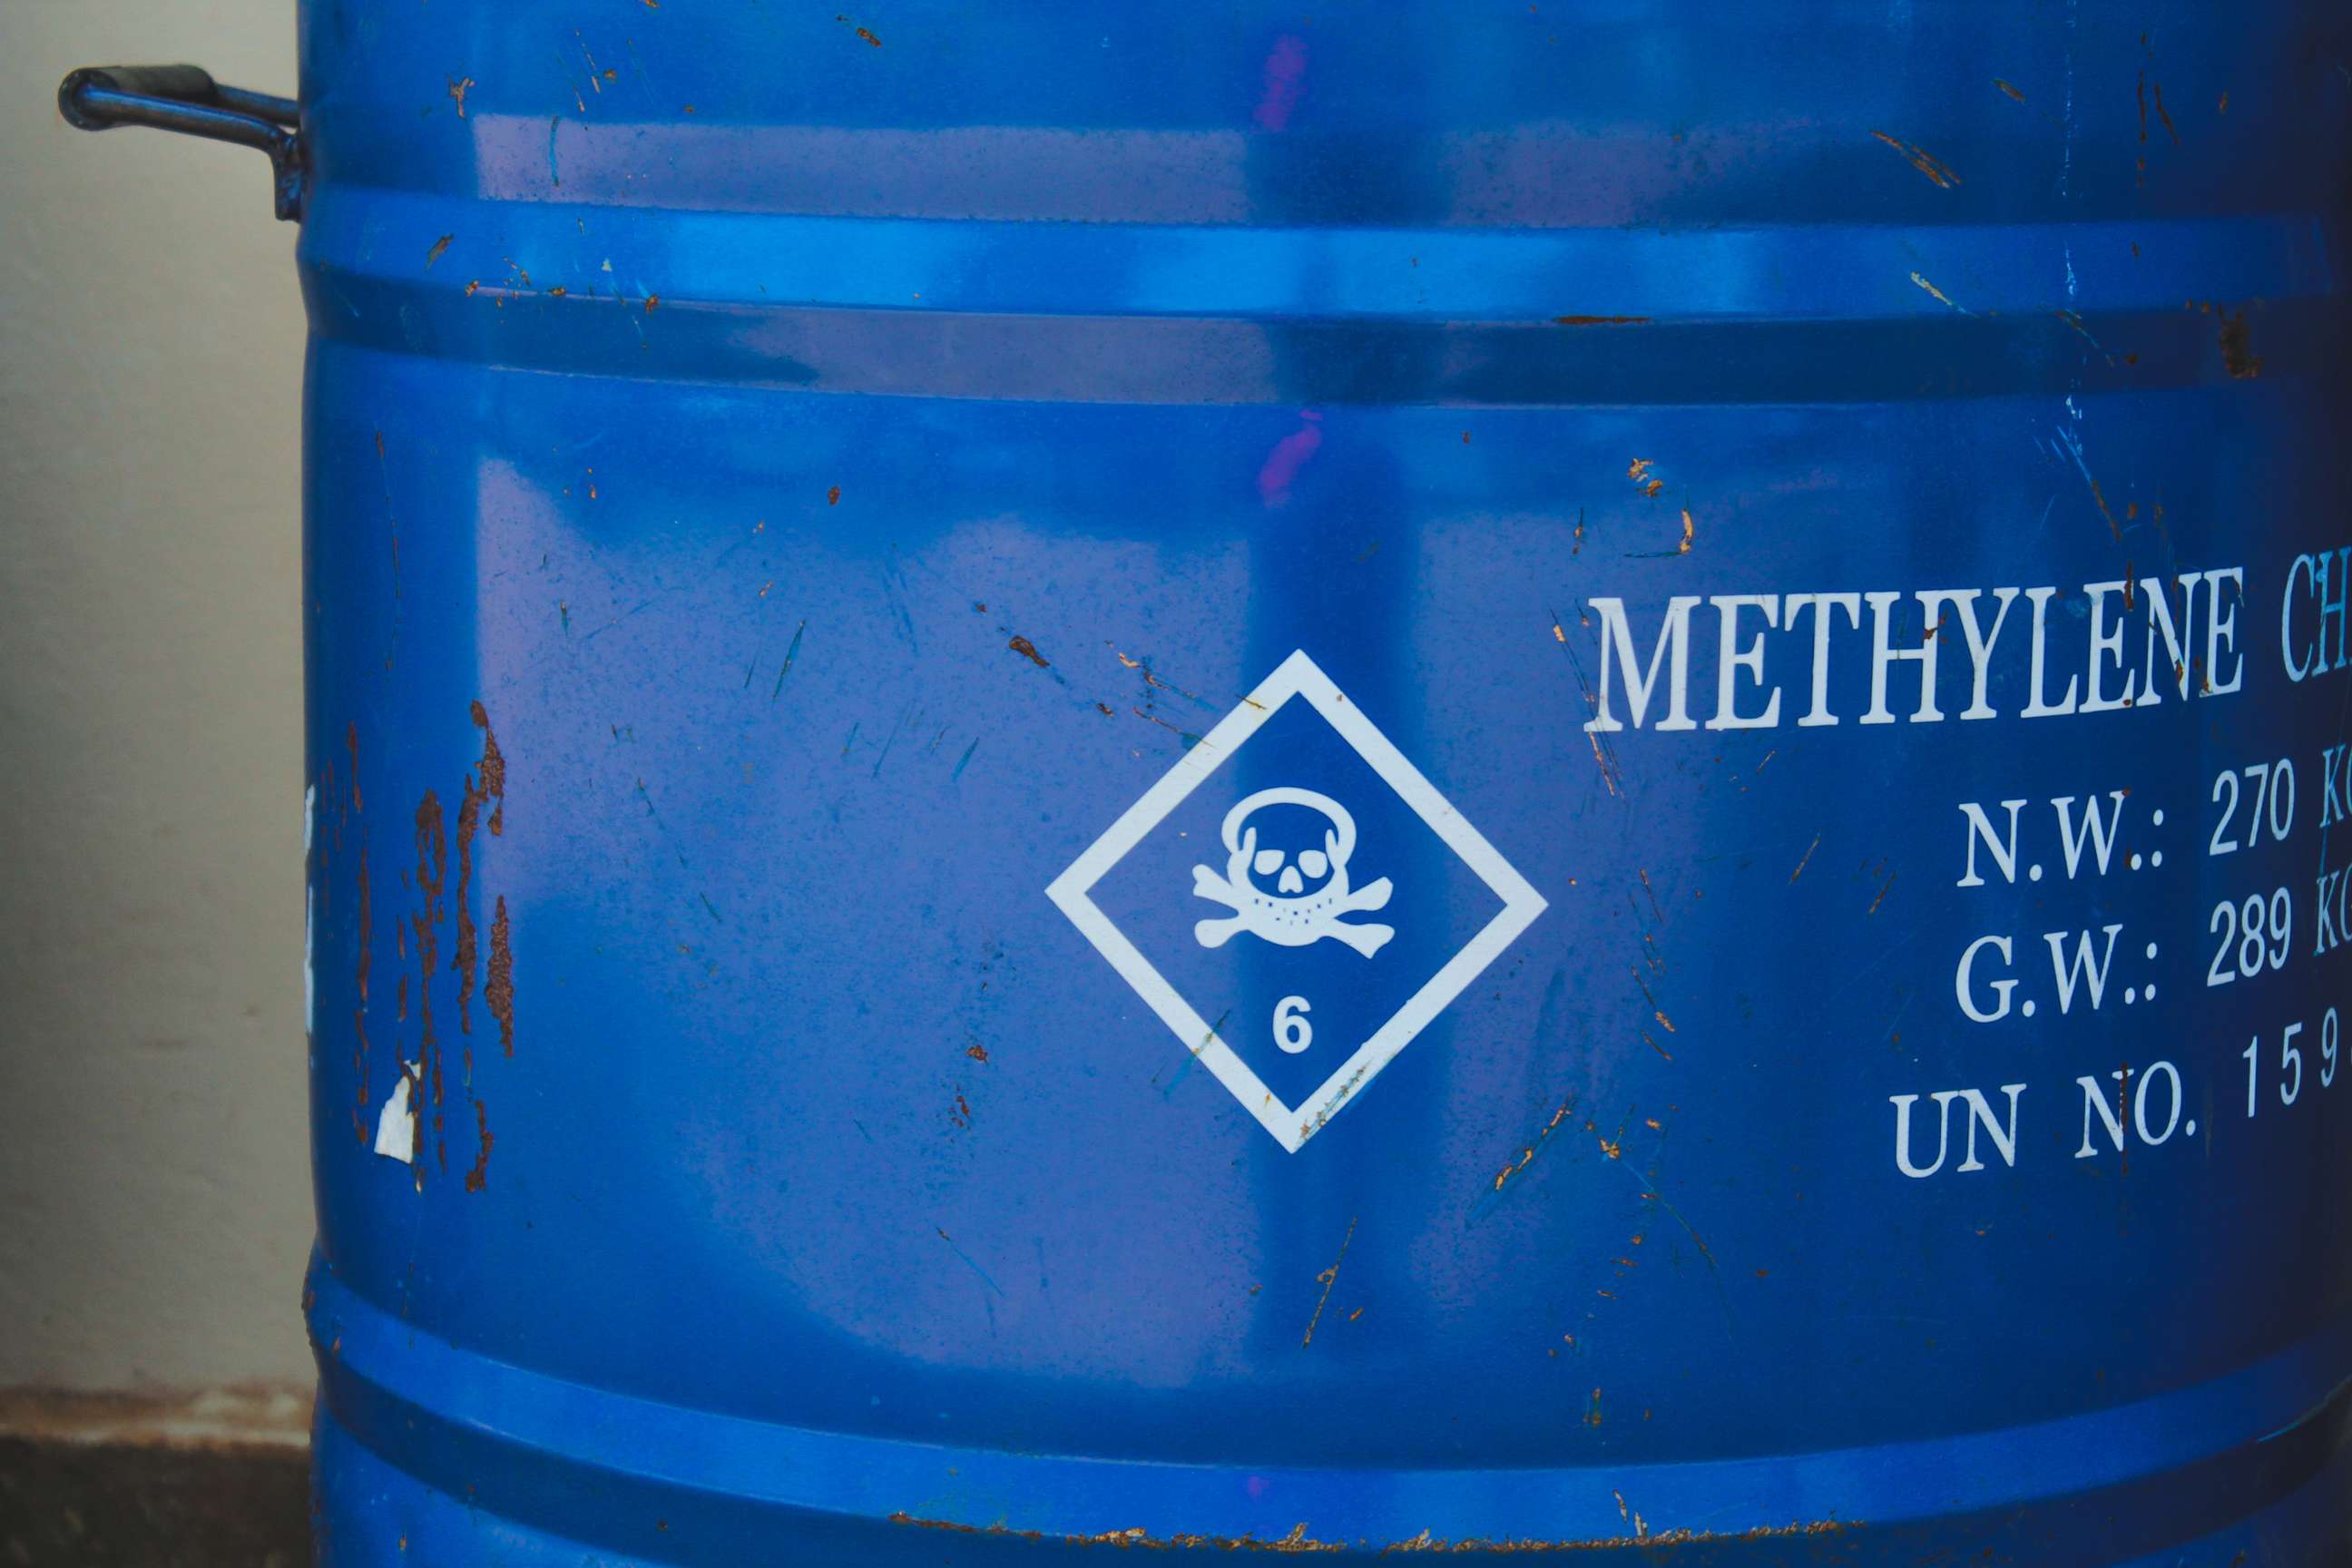 PHOTO: A blue barrel of methylene chloride is pictured in an undated stock photo.